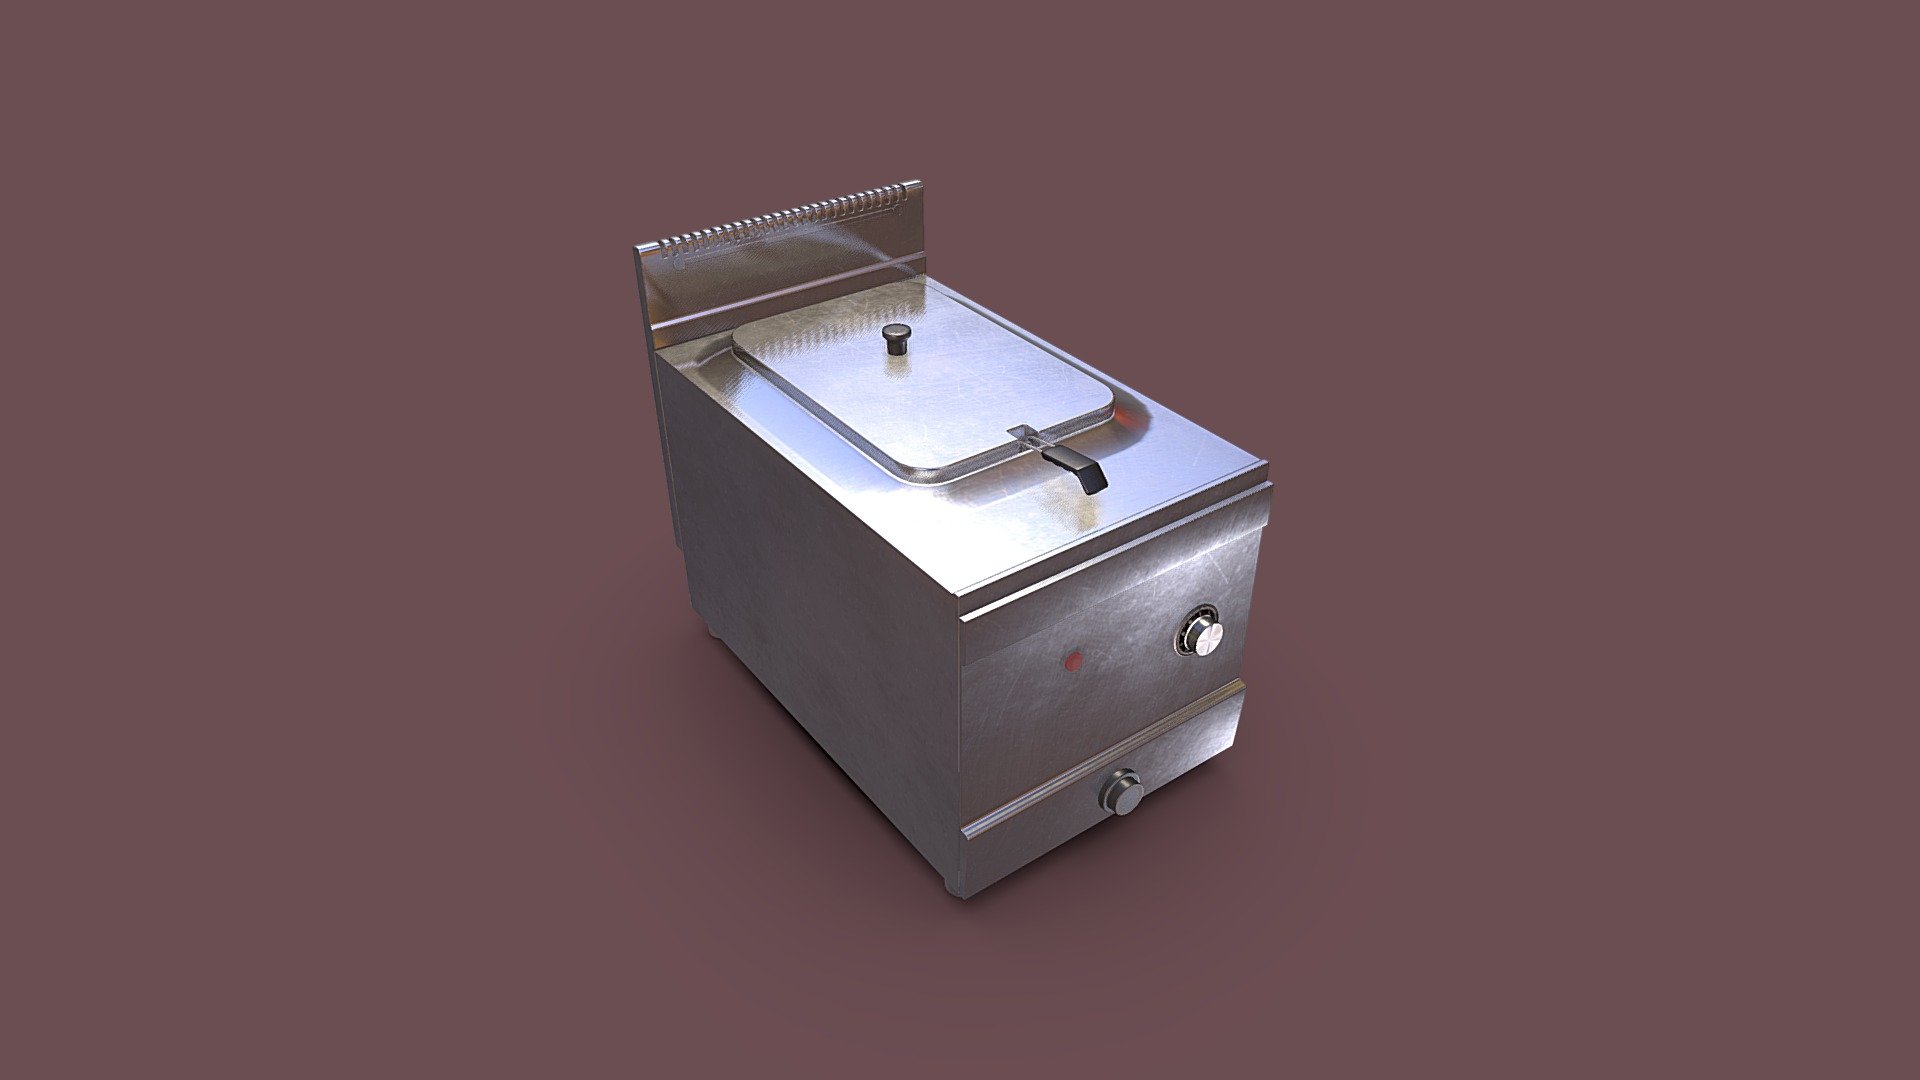 A mid poly model of a commercial gas deep fryer, useful for various purposes, It also consists a removable cover and a grill too so it can be used in any manner you prefer then whether its a game or an arch visualisation.

If you have any issue or query regarding this model or want to request other types of models, let me know in the comments 3d model